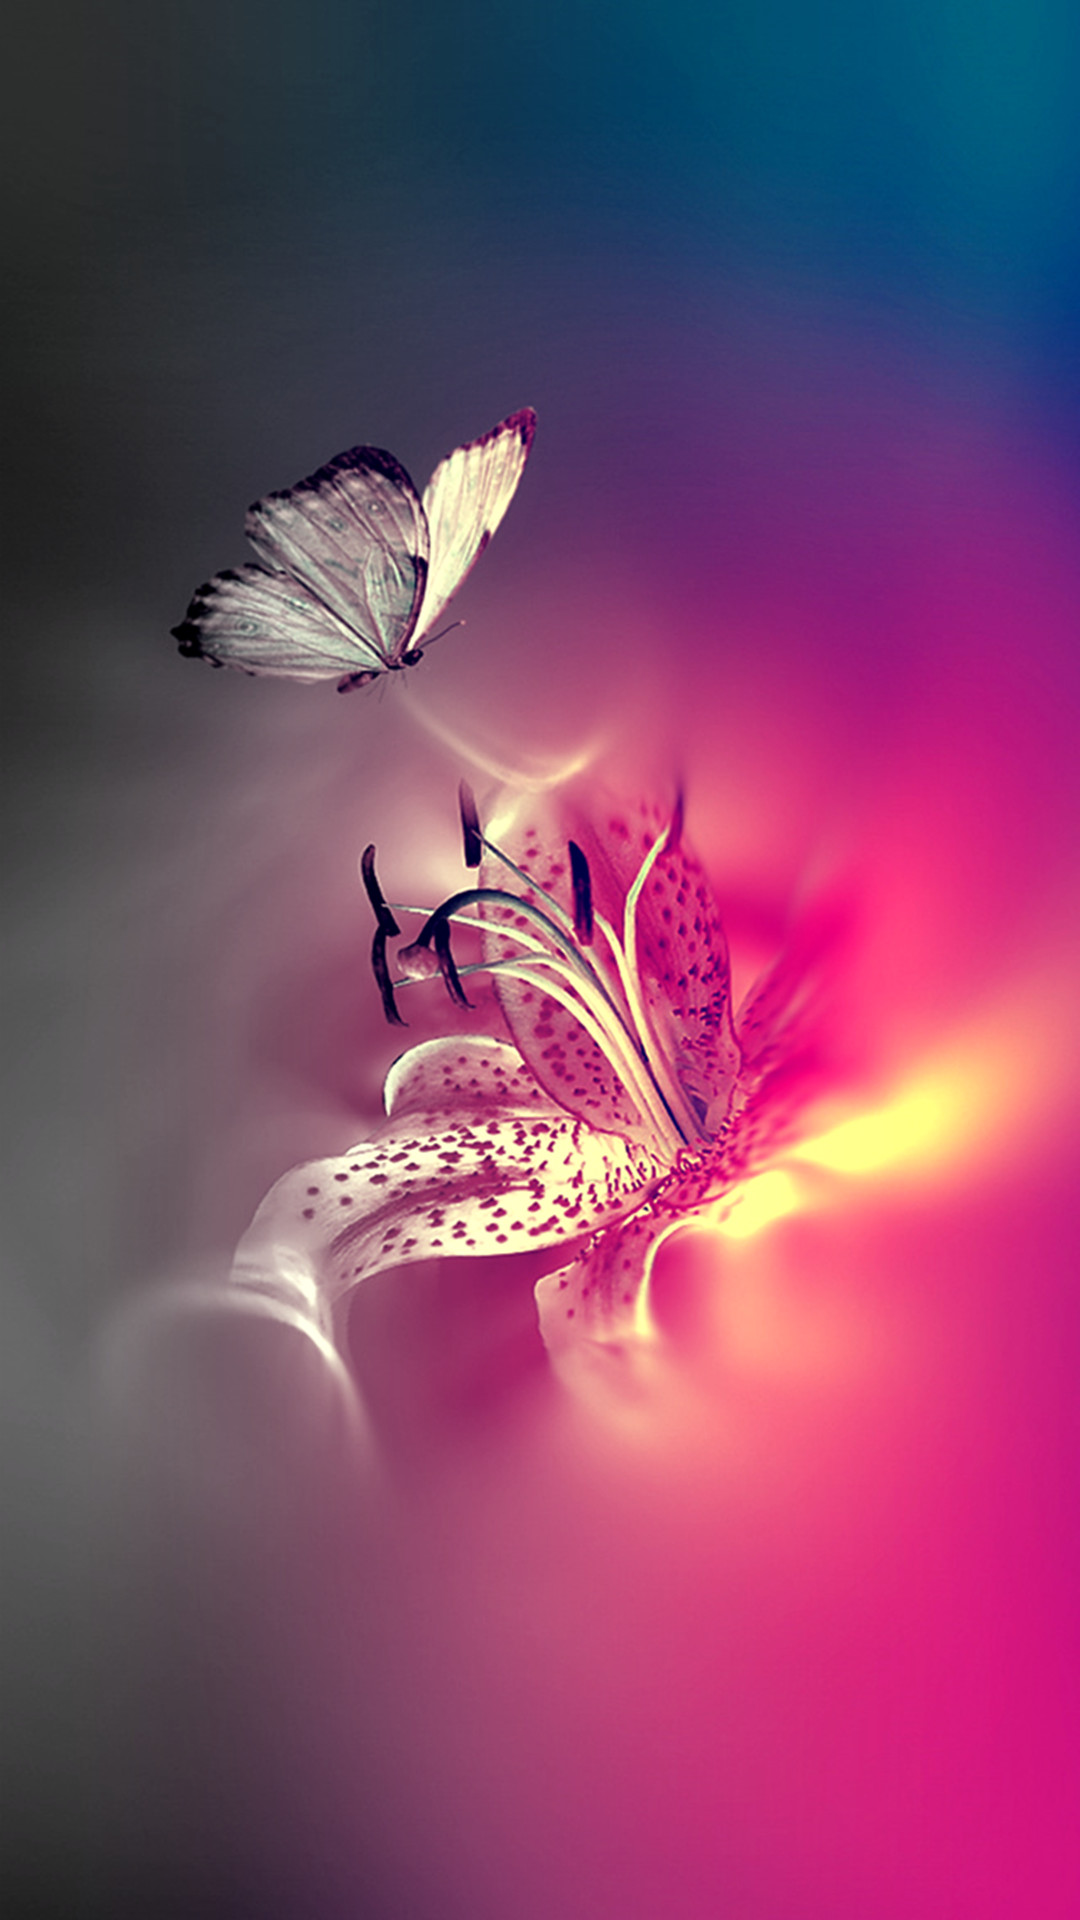 Tap To See More Beautiful Nature Iphone Wallpapers Butterfly And Flowers 1080x1920